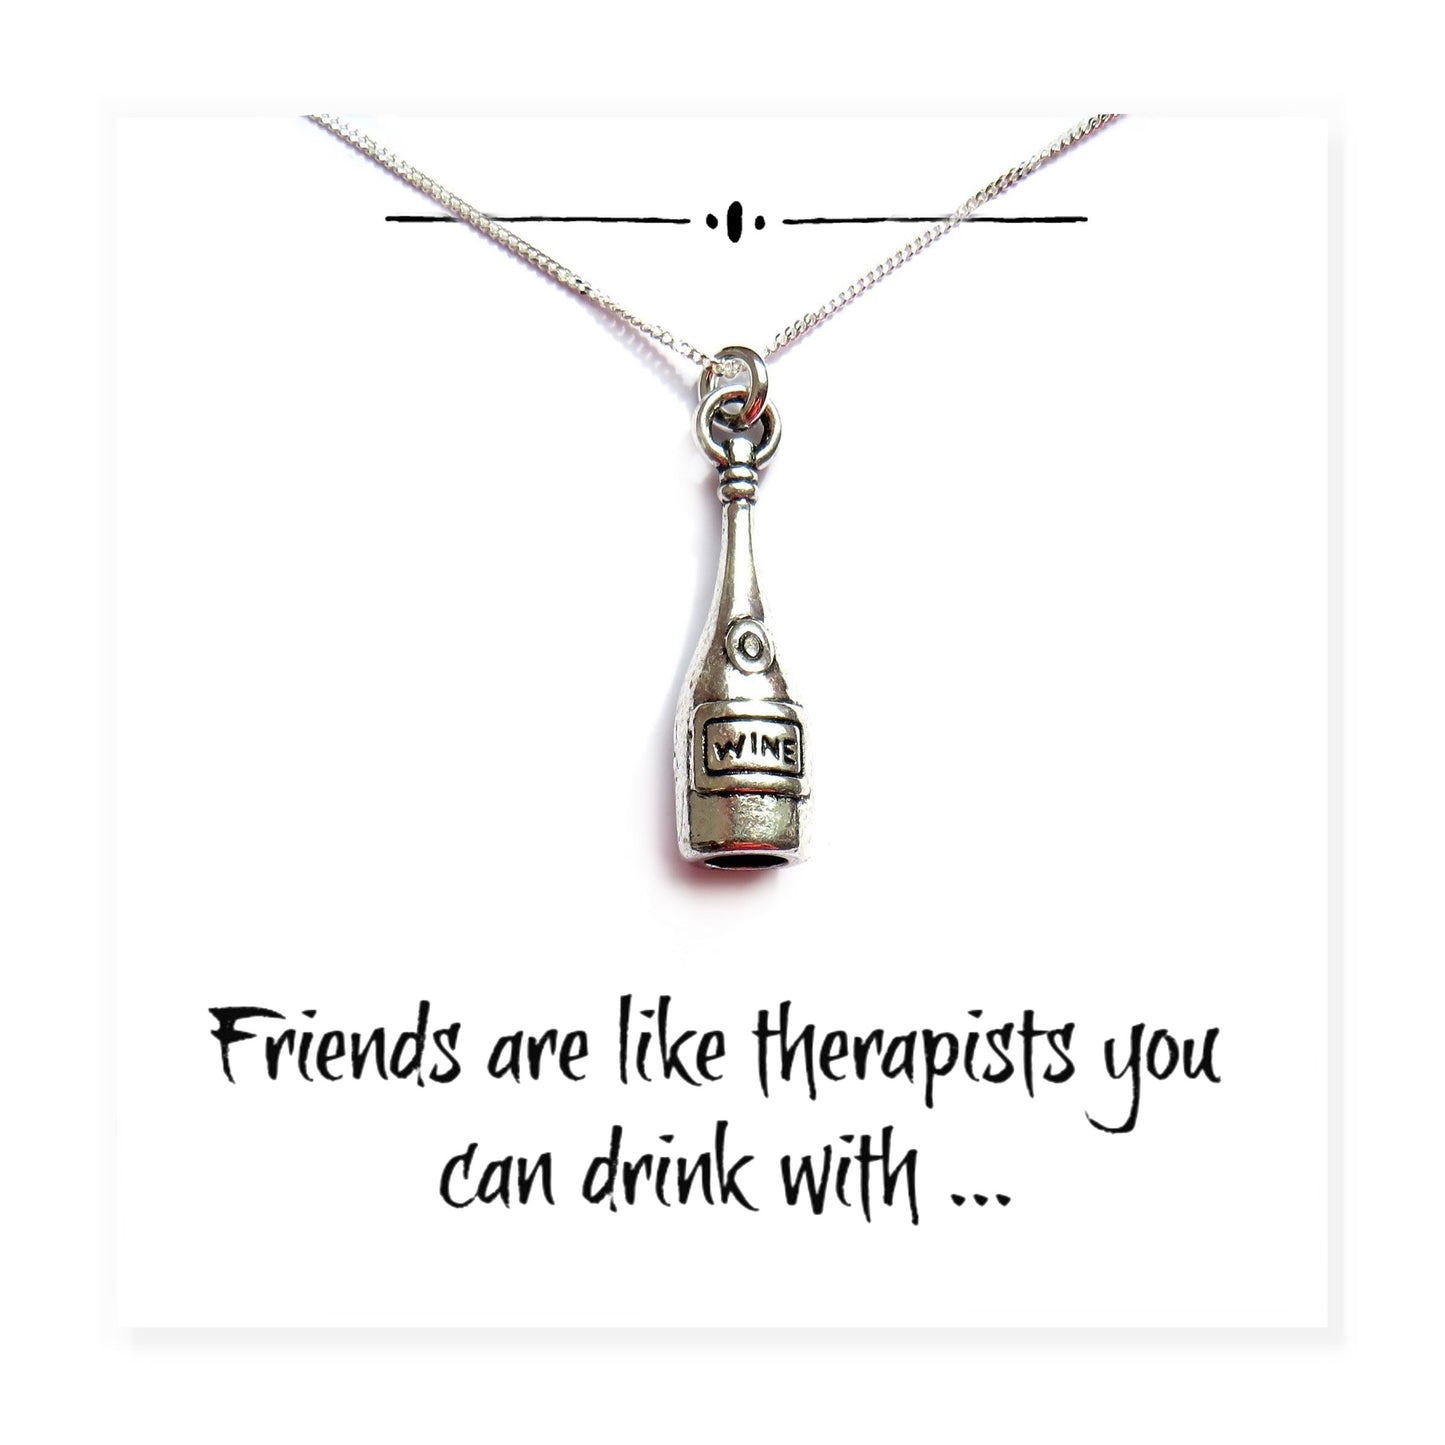 Wine Bottle Charm Necklace on Funny Friends Gift Card